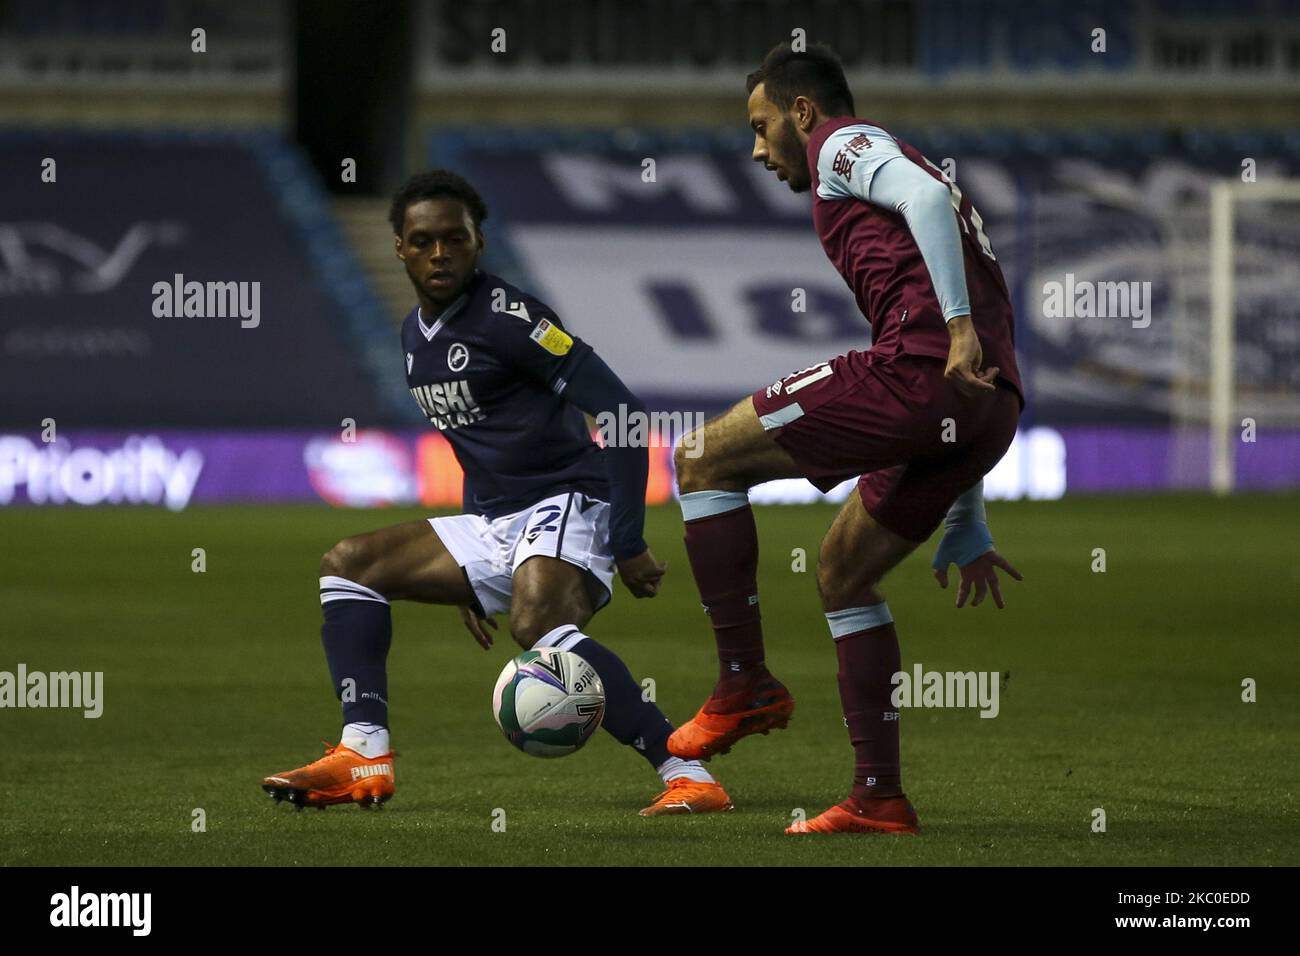 Mahlon Romeo of Millwall and Dwight Macneil of Burnley during the Carabao Cup match between Millwall and Burnley at The Den, London, England on 23rd September 2020. (Photo by Tom West/MI News/NurPhoto) Stock Photo